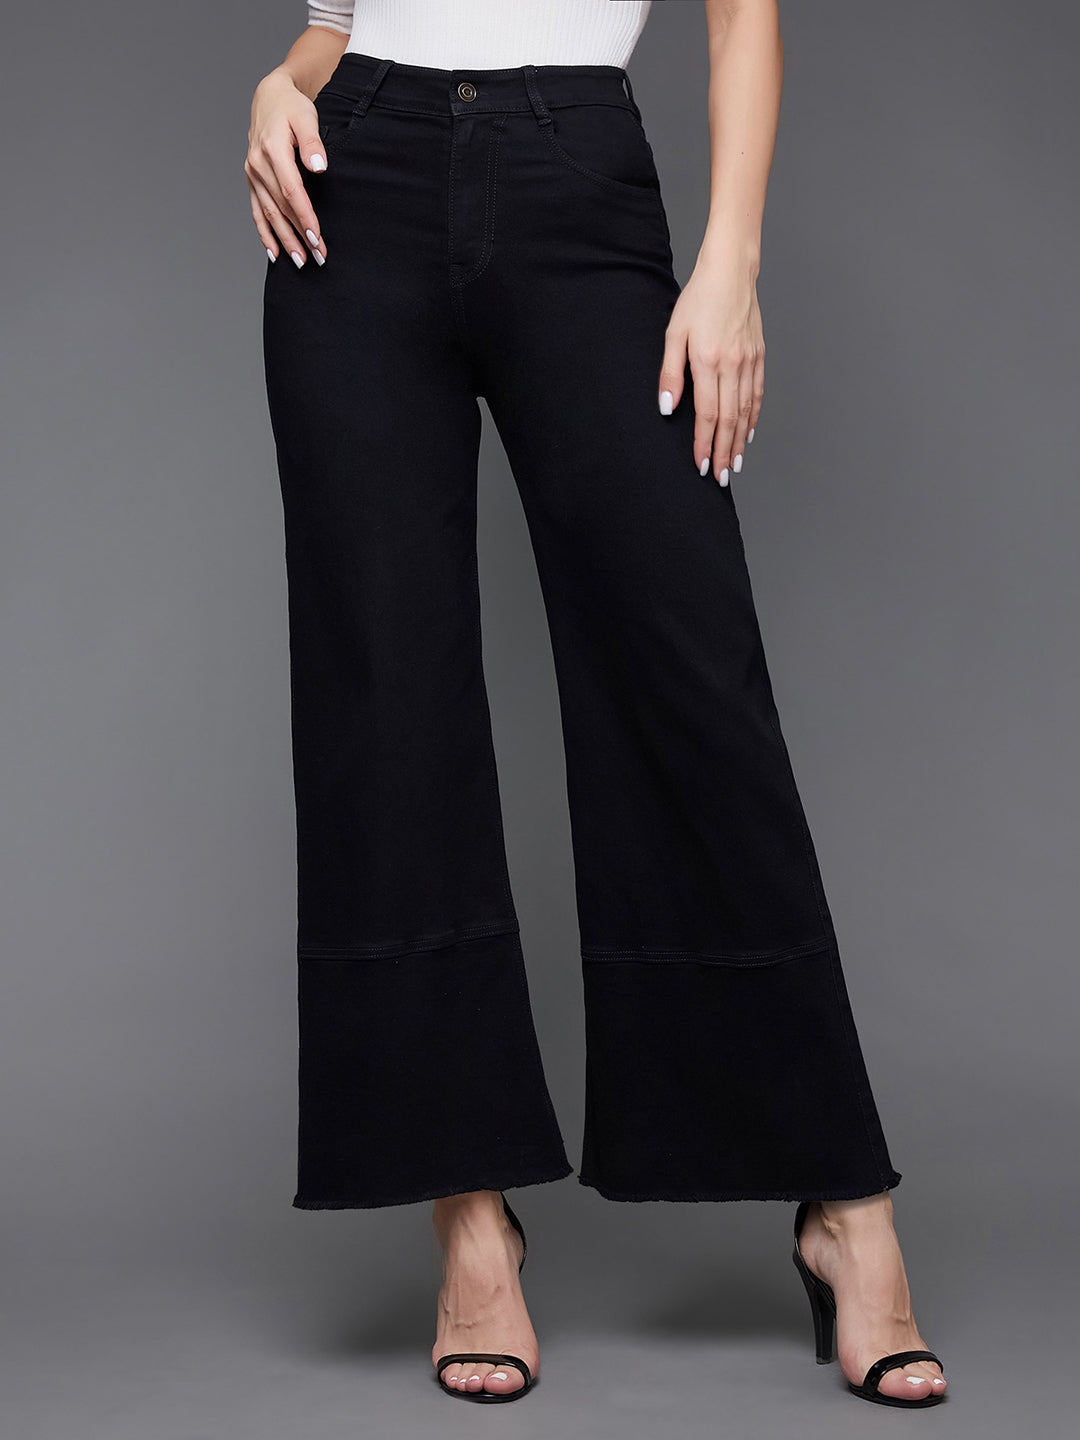 MISS CHASE | Black Wide Leg High Rise Clean Look Regular-Length Stretchable Denim Jeans